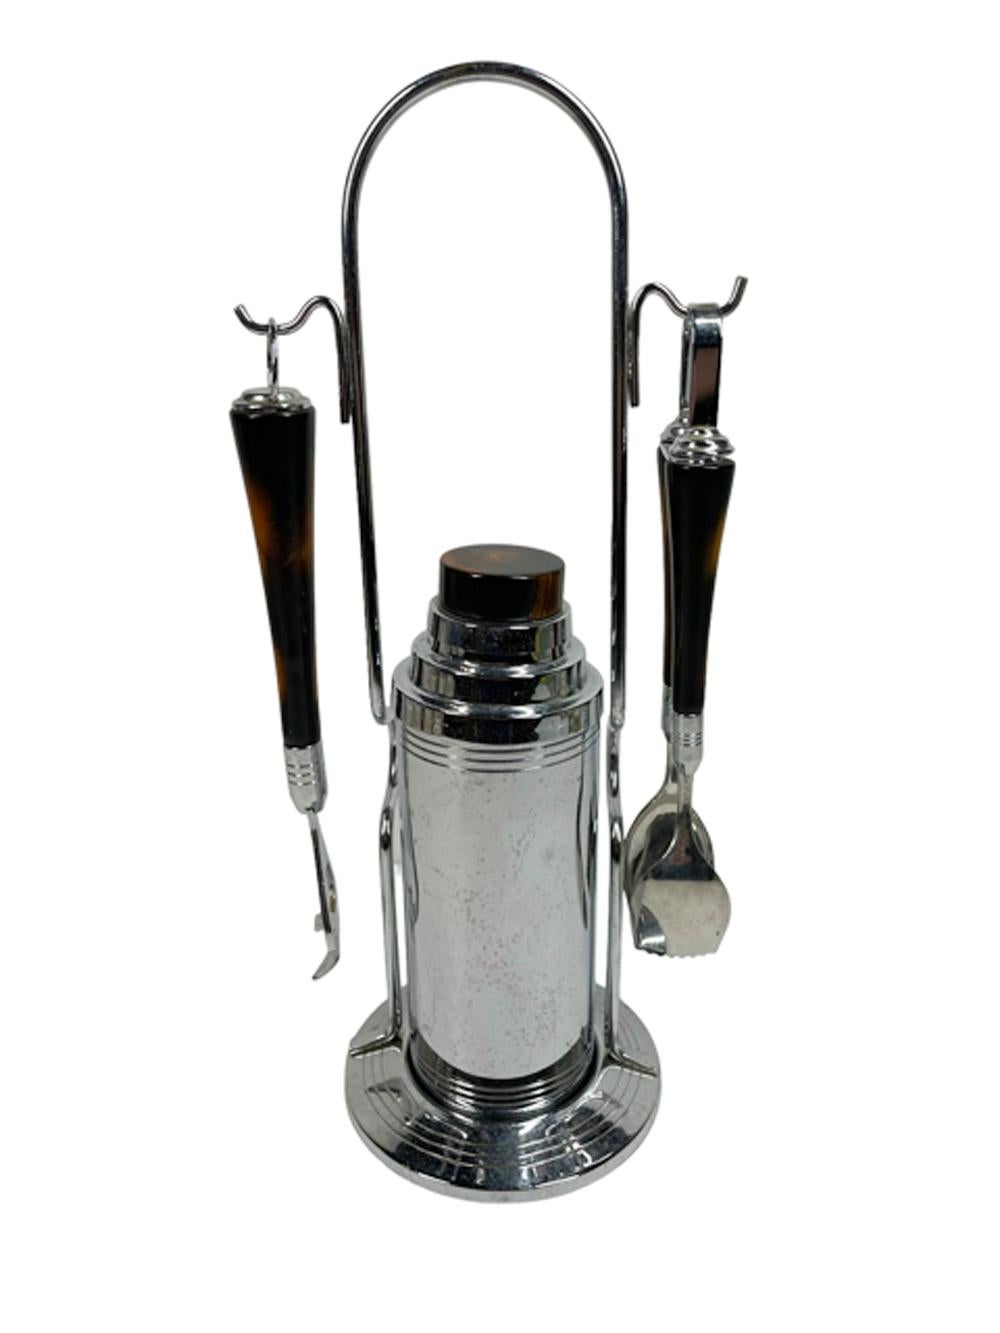 Vintage Glo-Hill chrome and Bakelite cocktail shaker caddy set - chrome with mottled brown faux tortoiseshell Bakelite cylindrical shaker sits in a circular base with a tall arched handle having hooks on either side holding Bakelite handled tong on